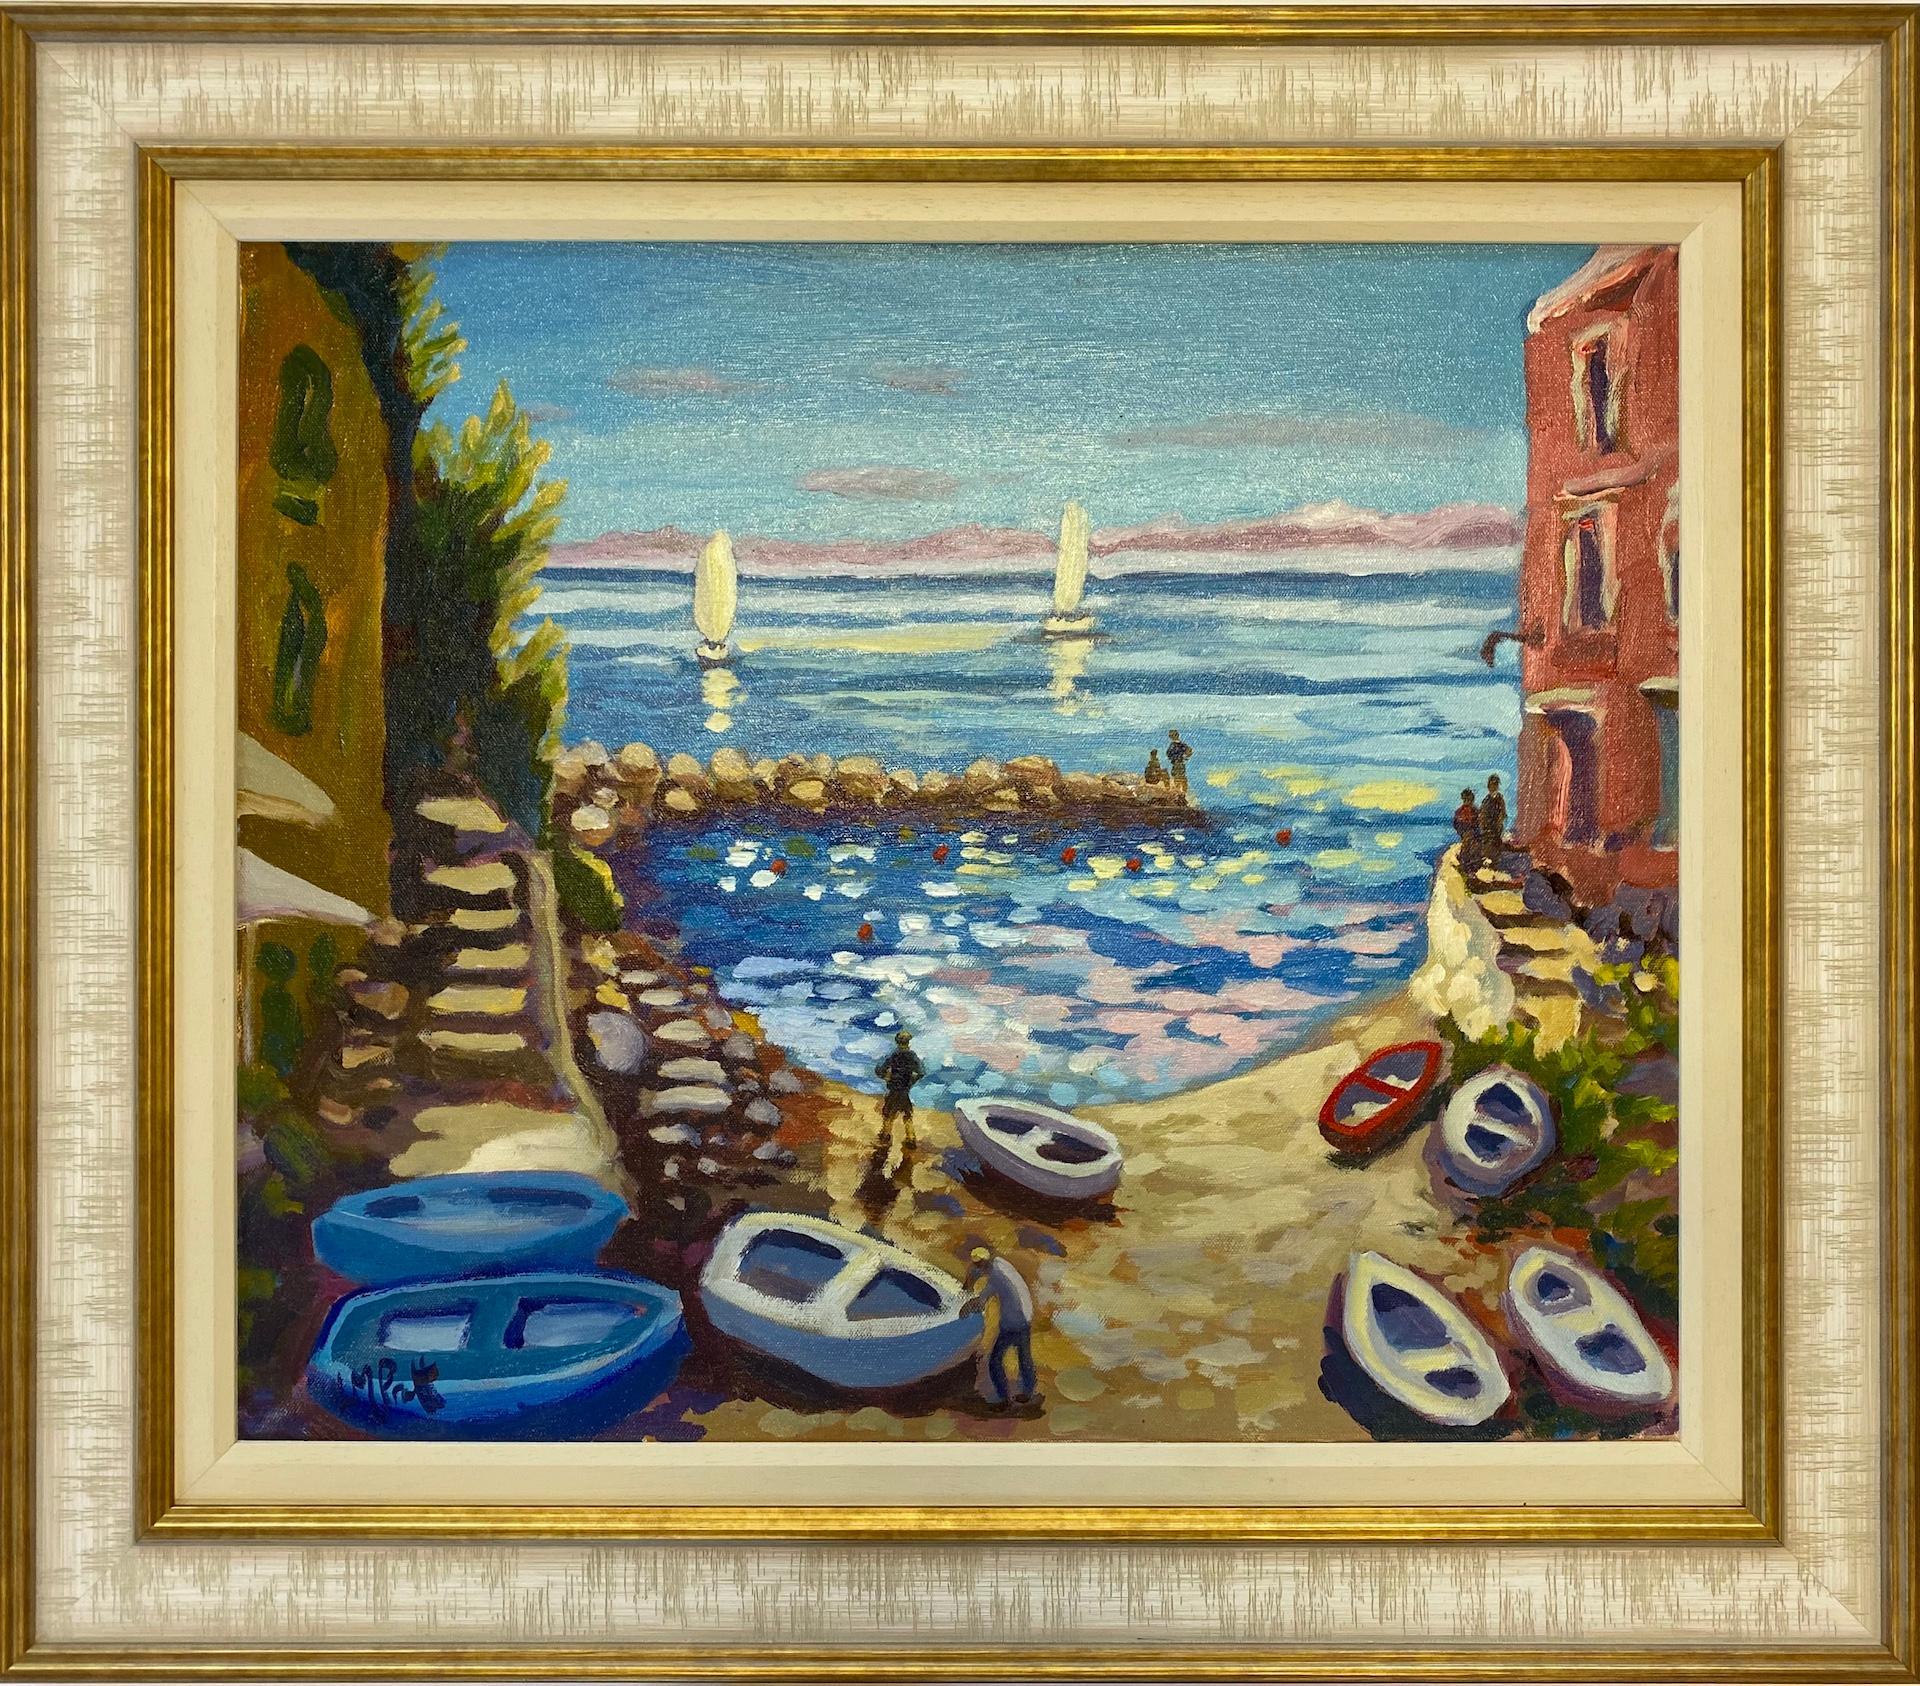 Down with the Boats, Original Italian Seascape Painting, Mediterranean Art - Blue Figurative Painting by Lucy Pratt